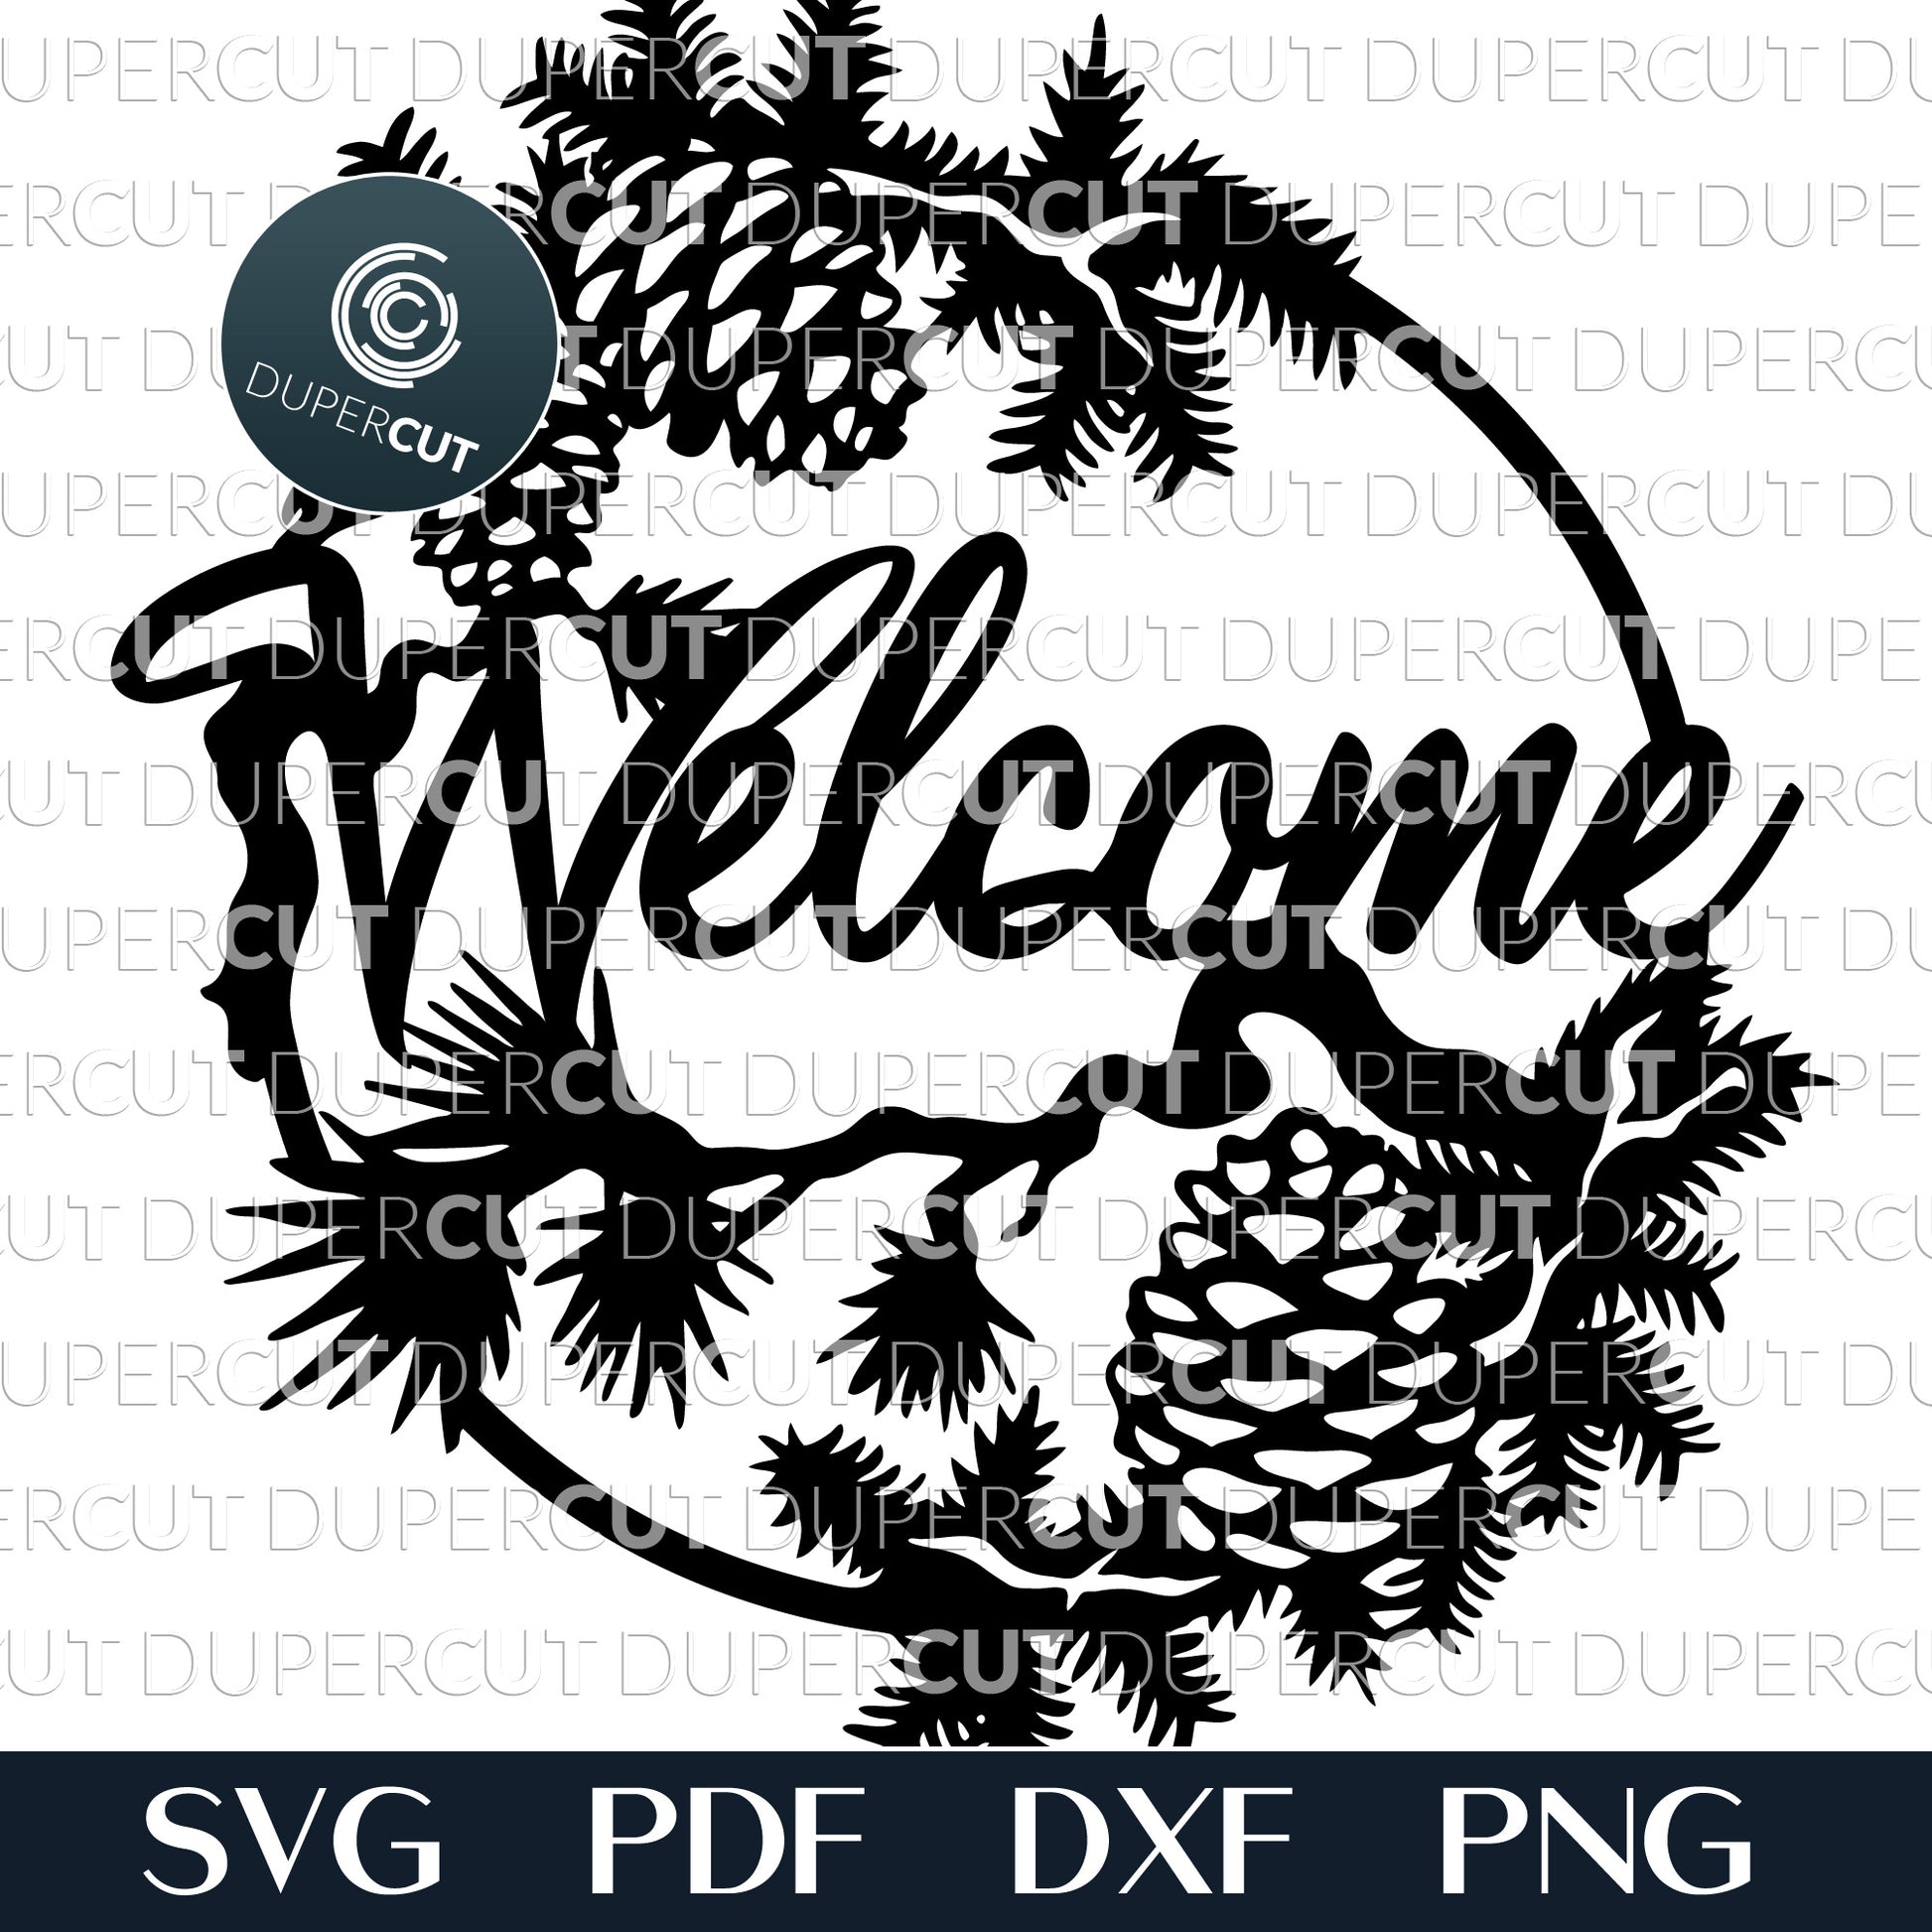 Pinecone welcome sign - cabin decoration - laser cutting files SVG PDF DXF vector template for Glowforge, Cricut, Silhouette Cameo, CNC plasma machines